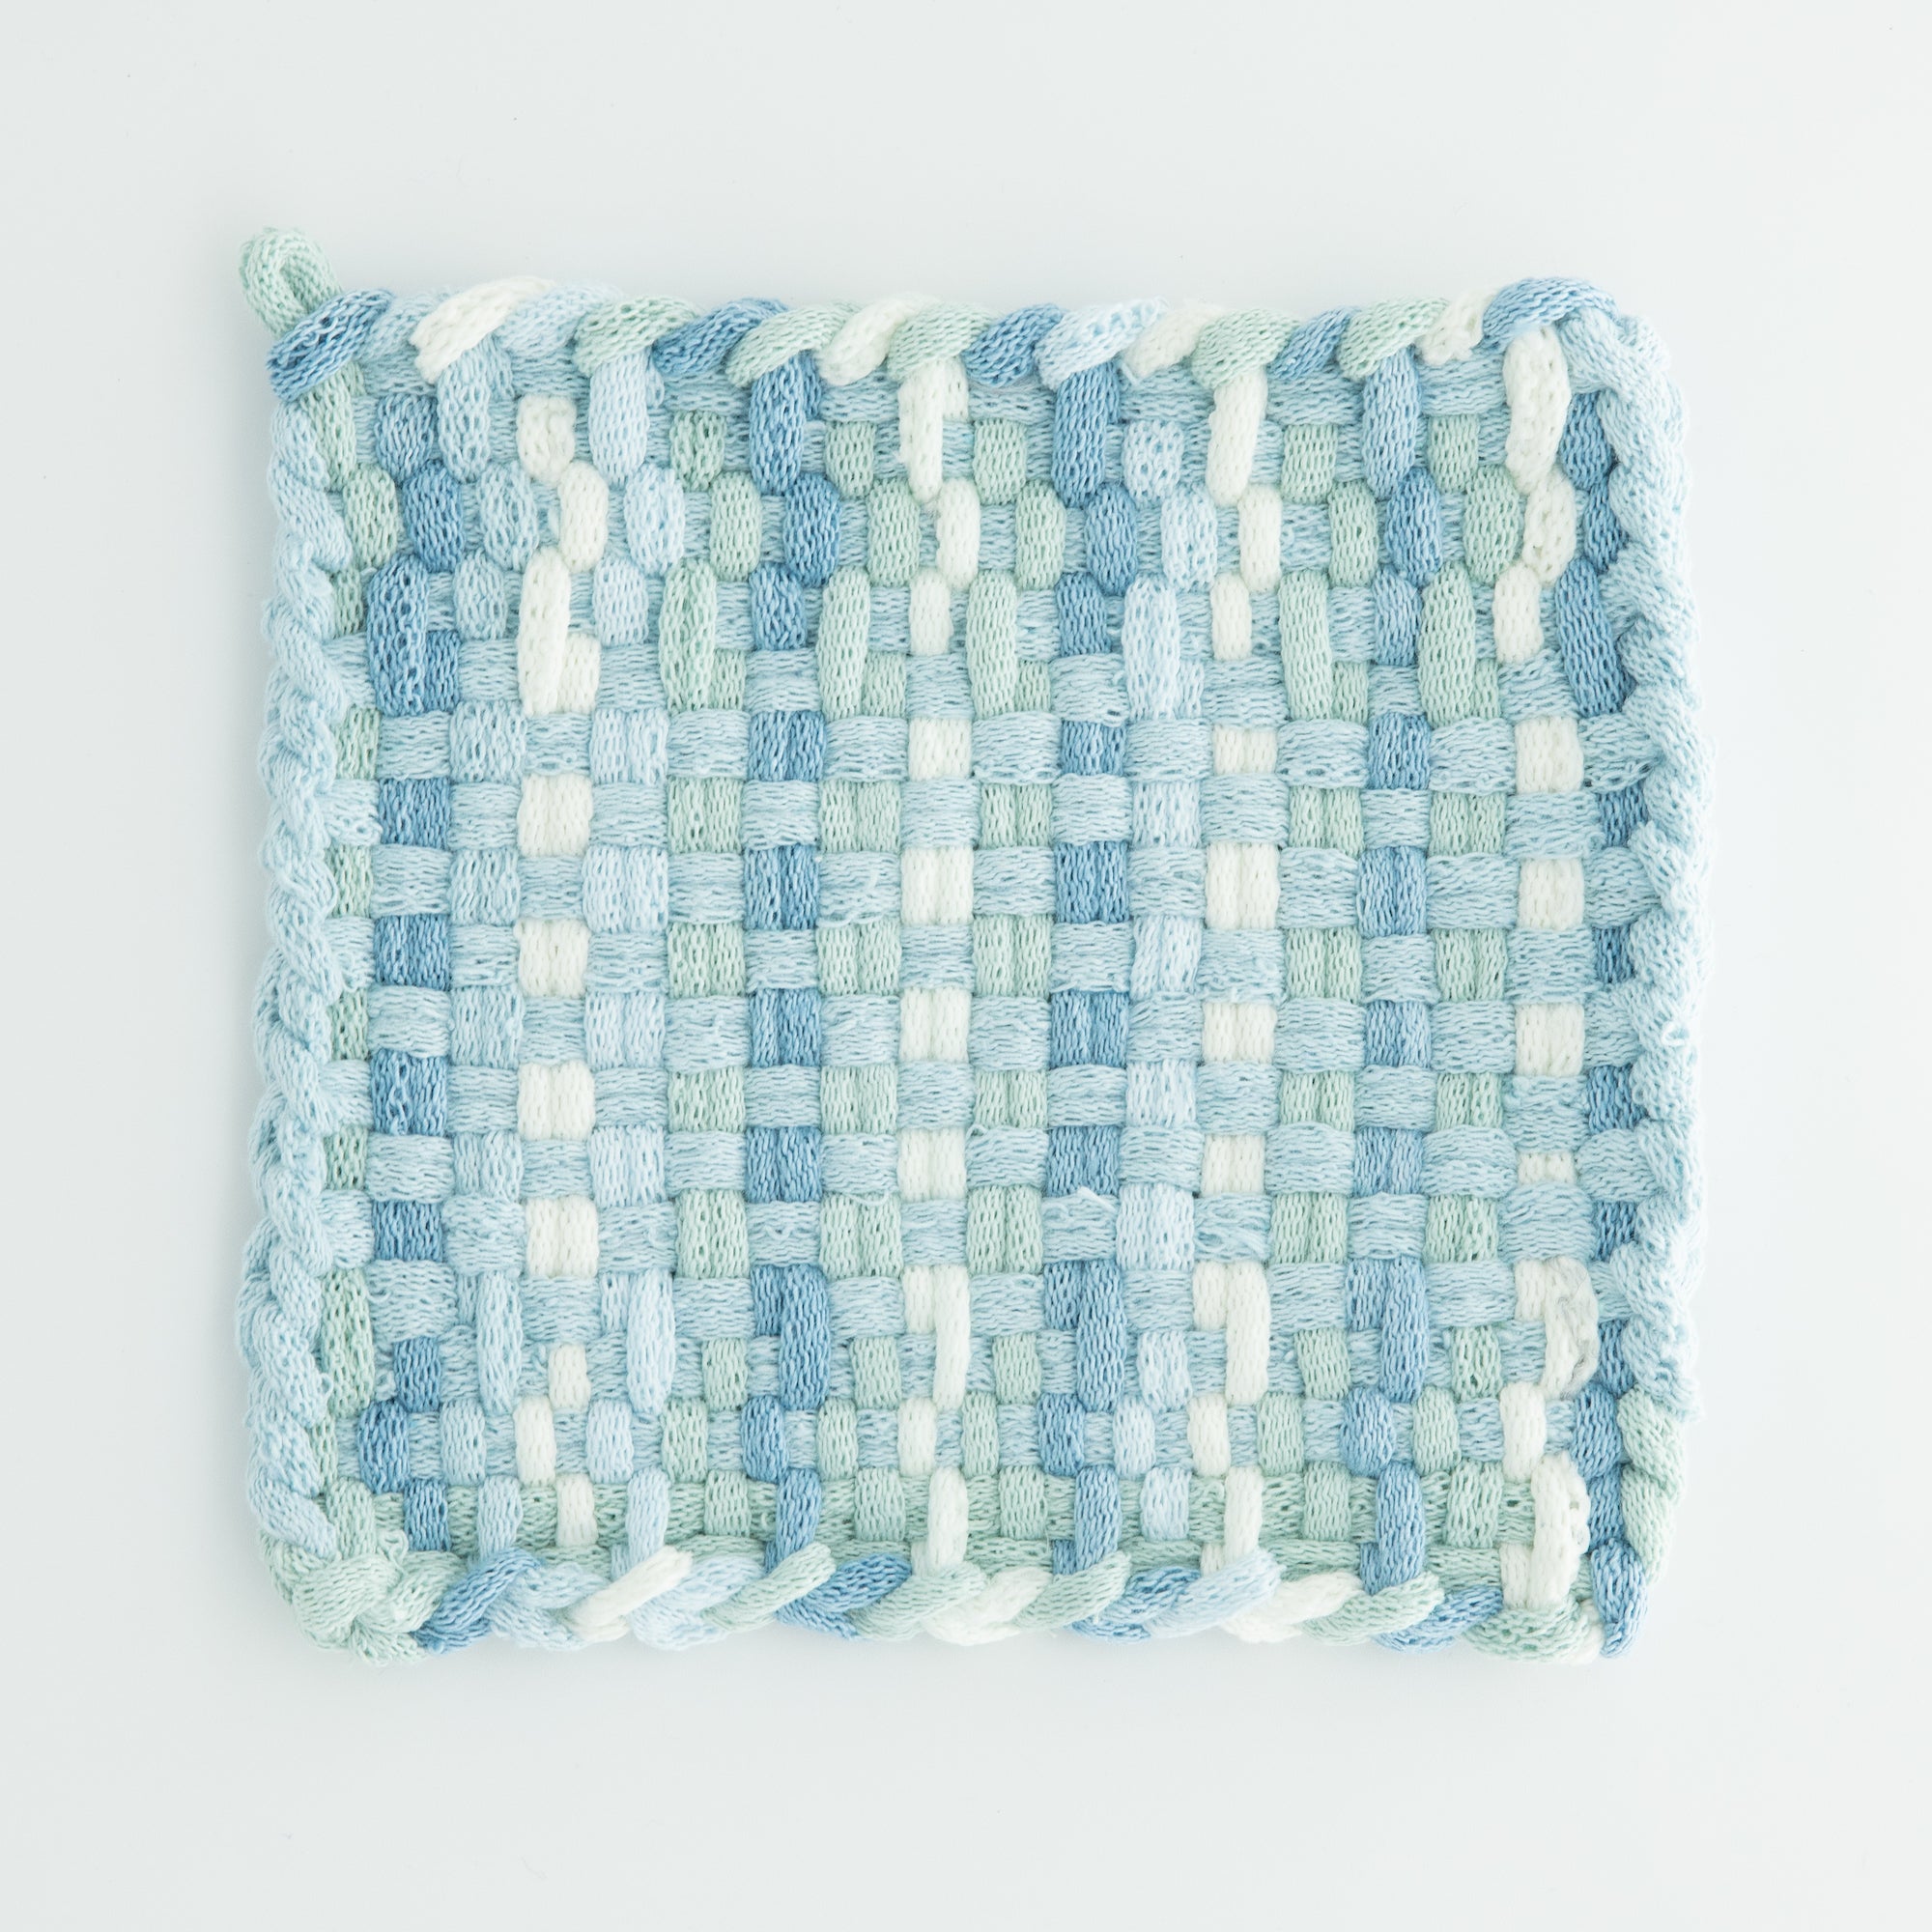 One-of-a-kind potholder in Blue/ mixed blues – Kate Kilmurray